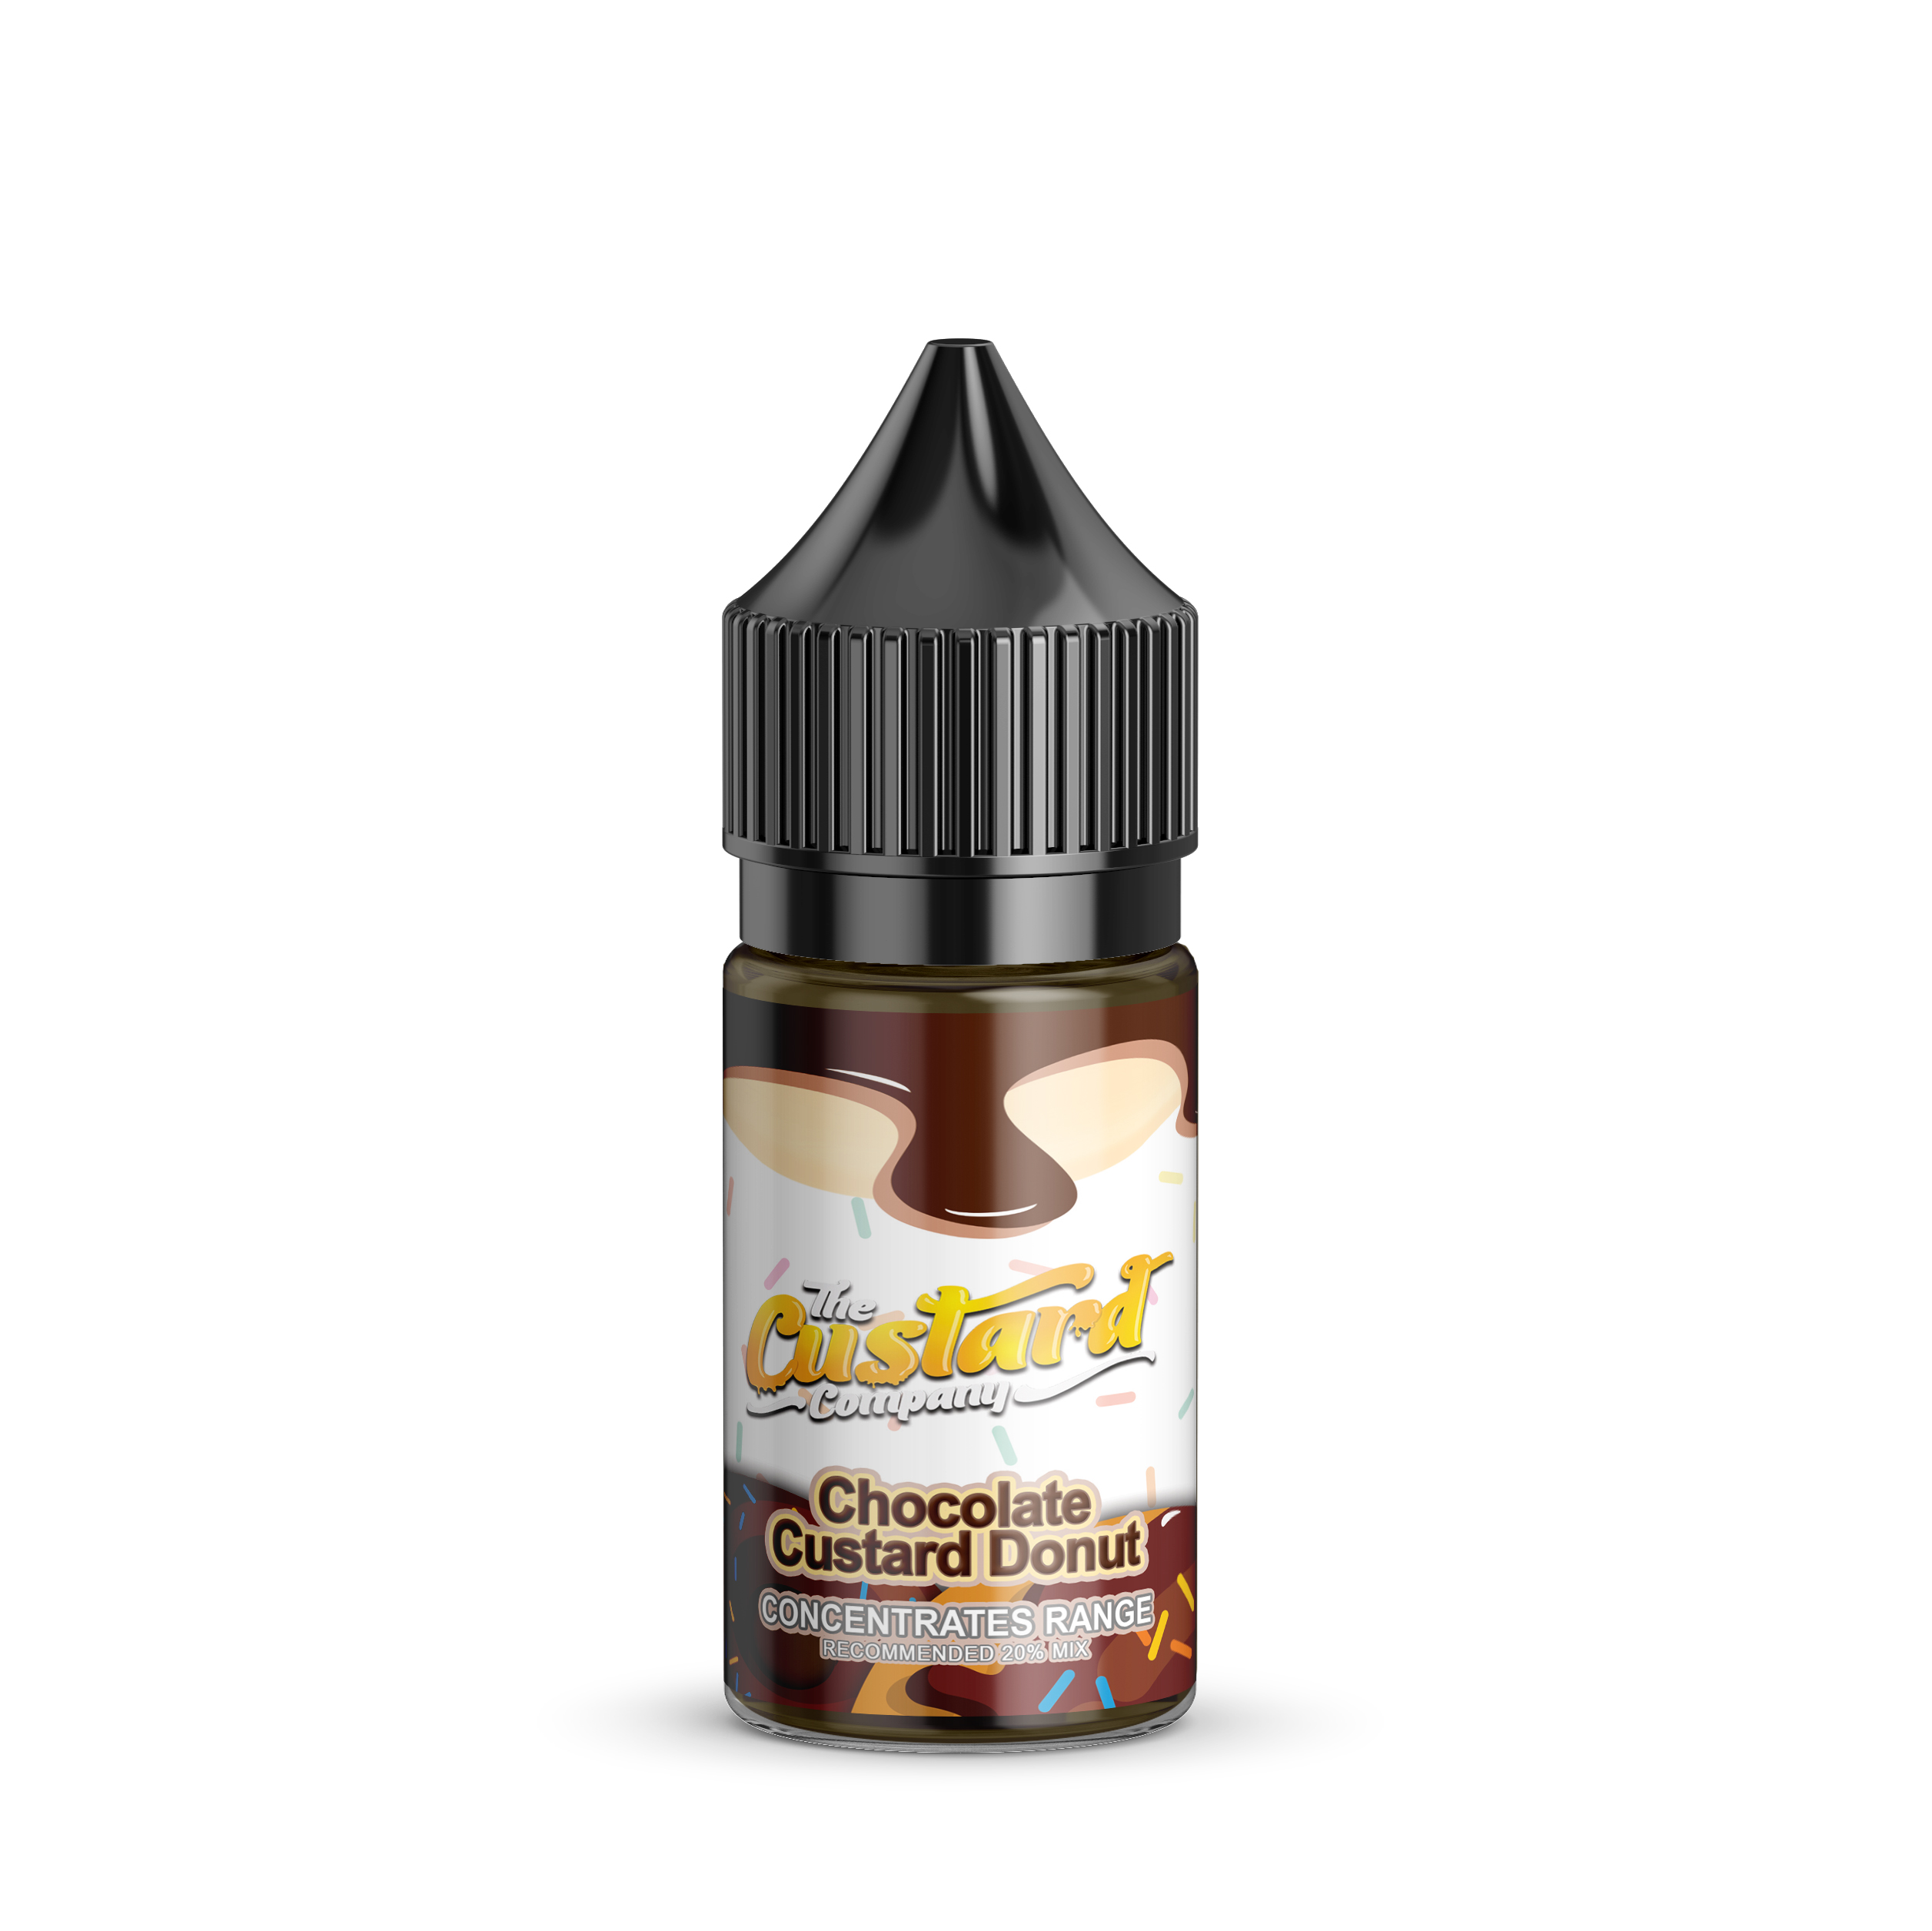 Chocolate Custard Doughnut Flavour Concentrate by The Custard Company